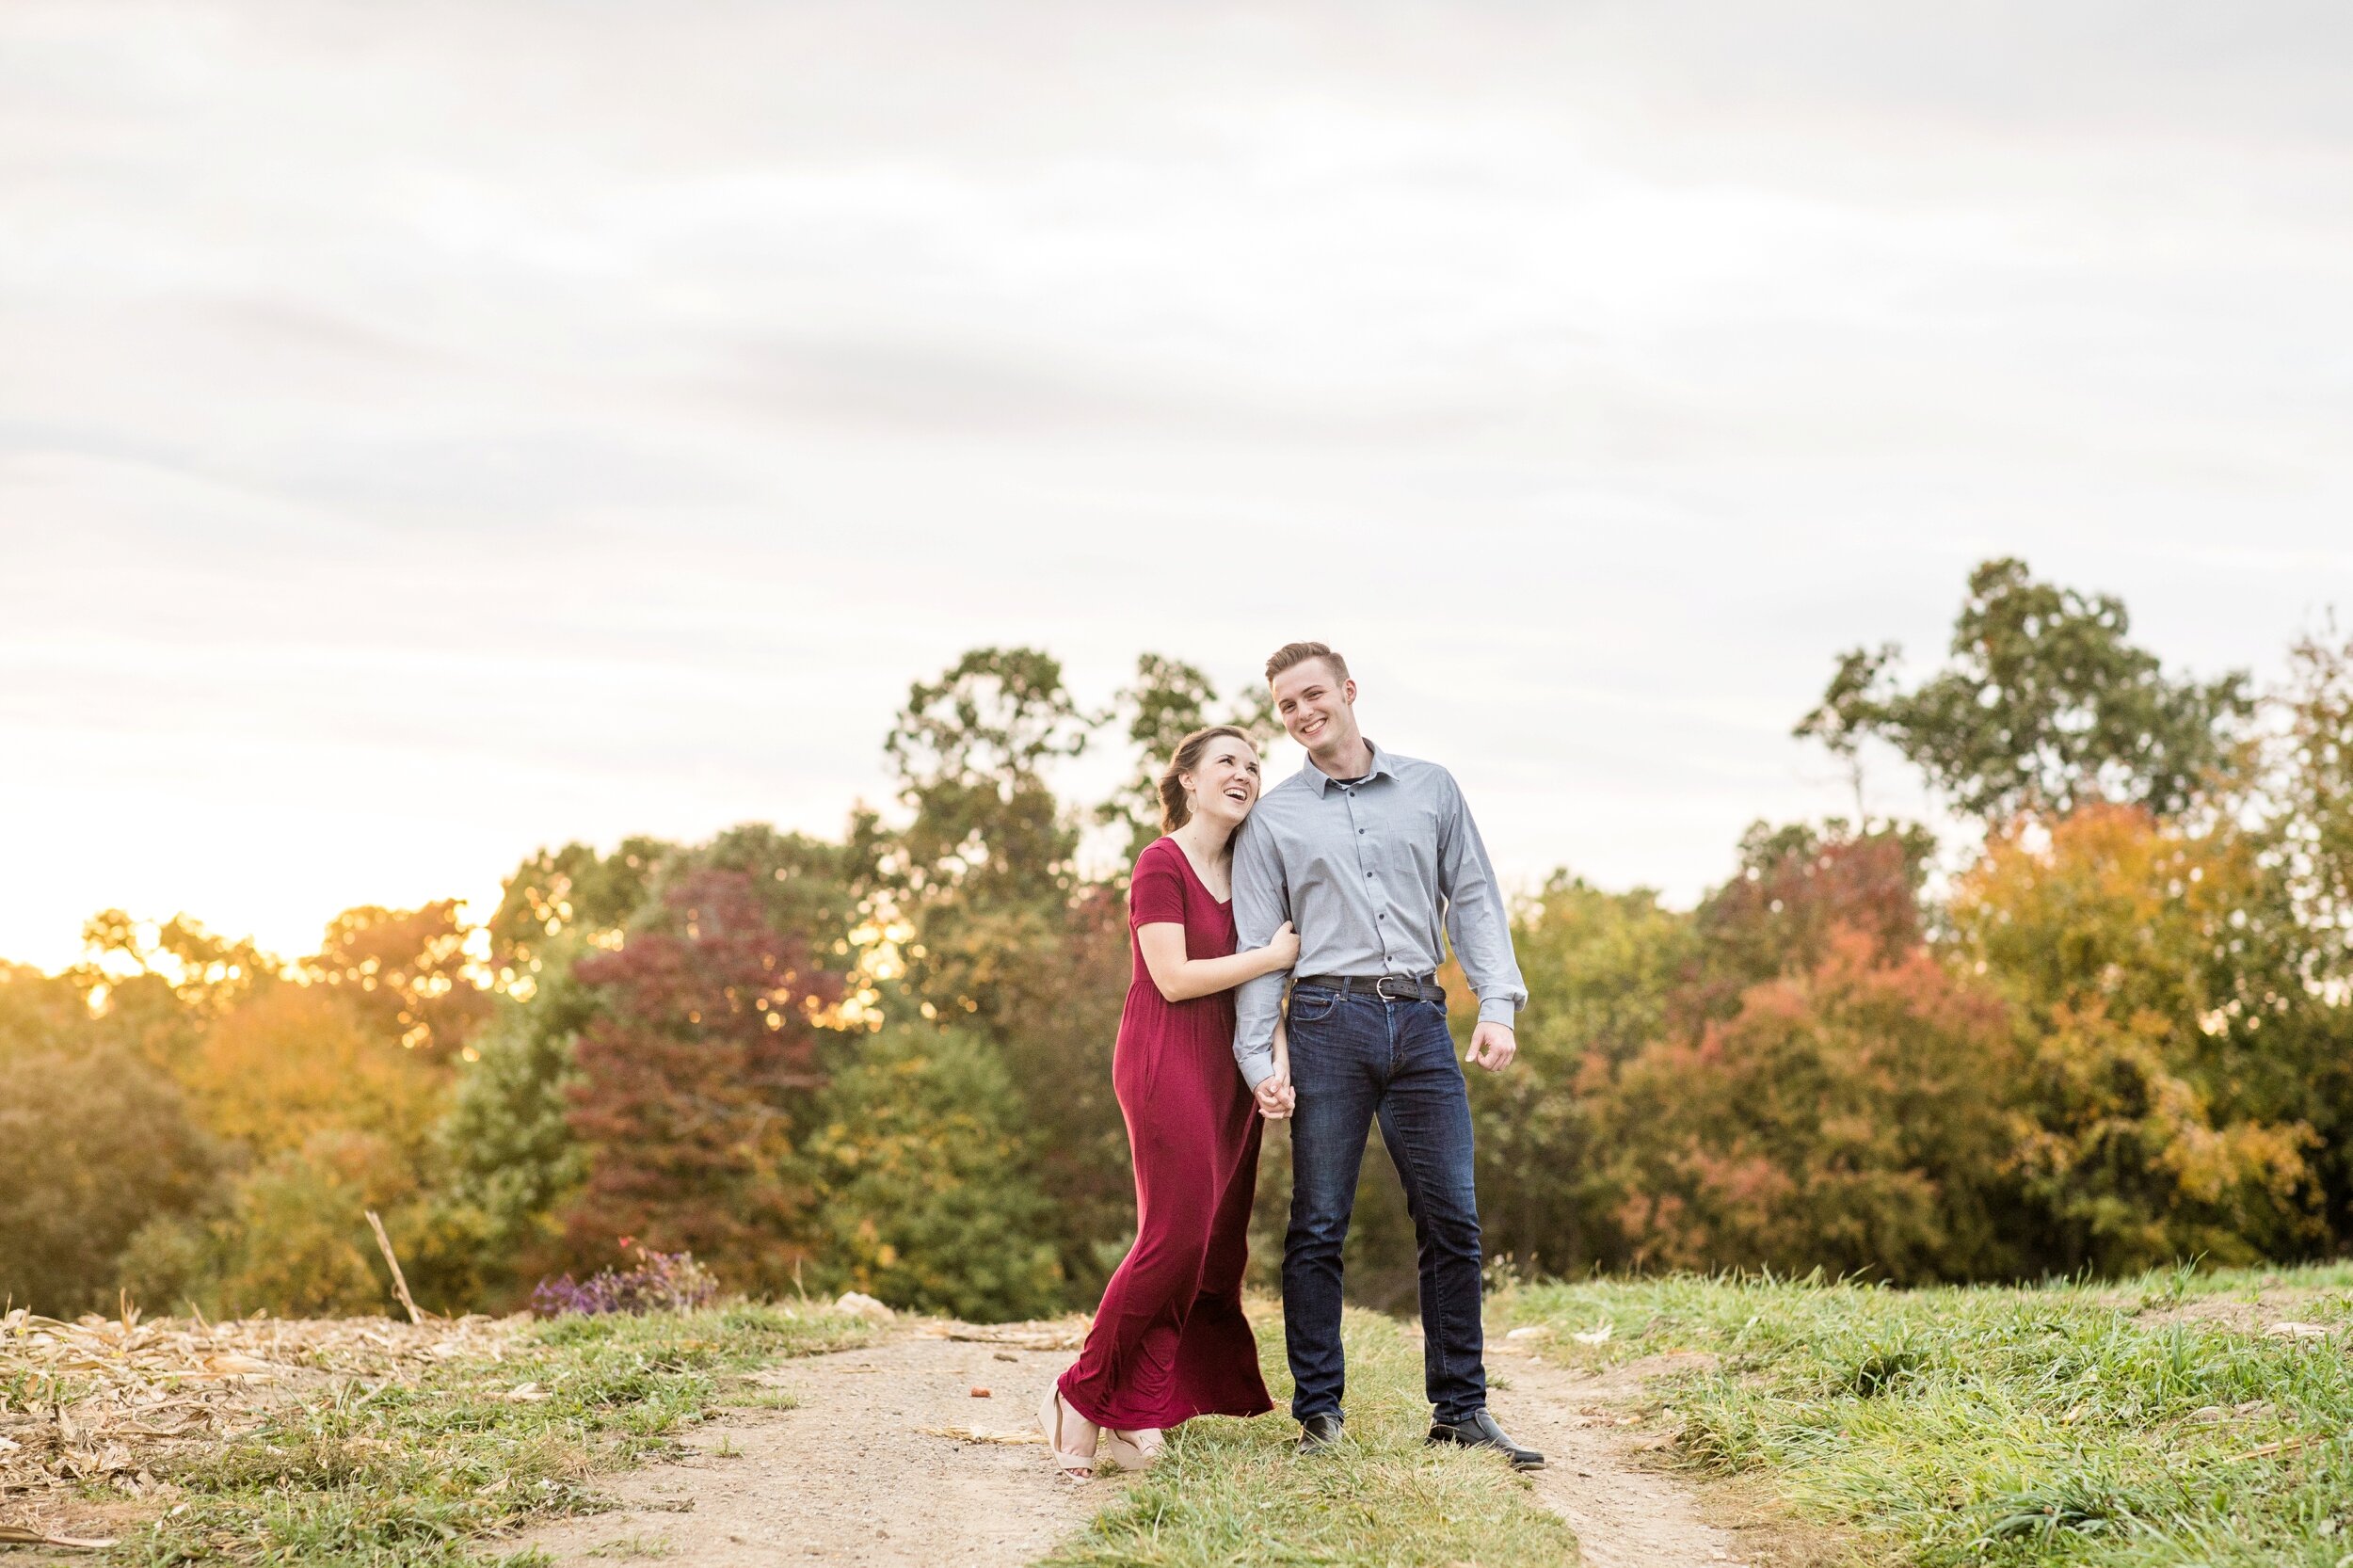 pittsburgh engagement photographer,  ewing park engagement photos, pittsburgh wedding photographer, what to wear for fall engagement photos